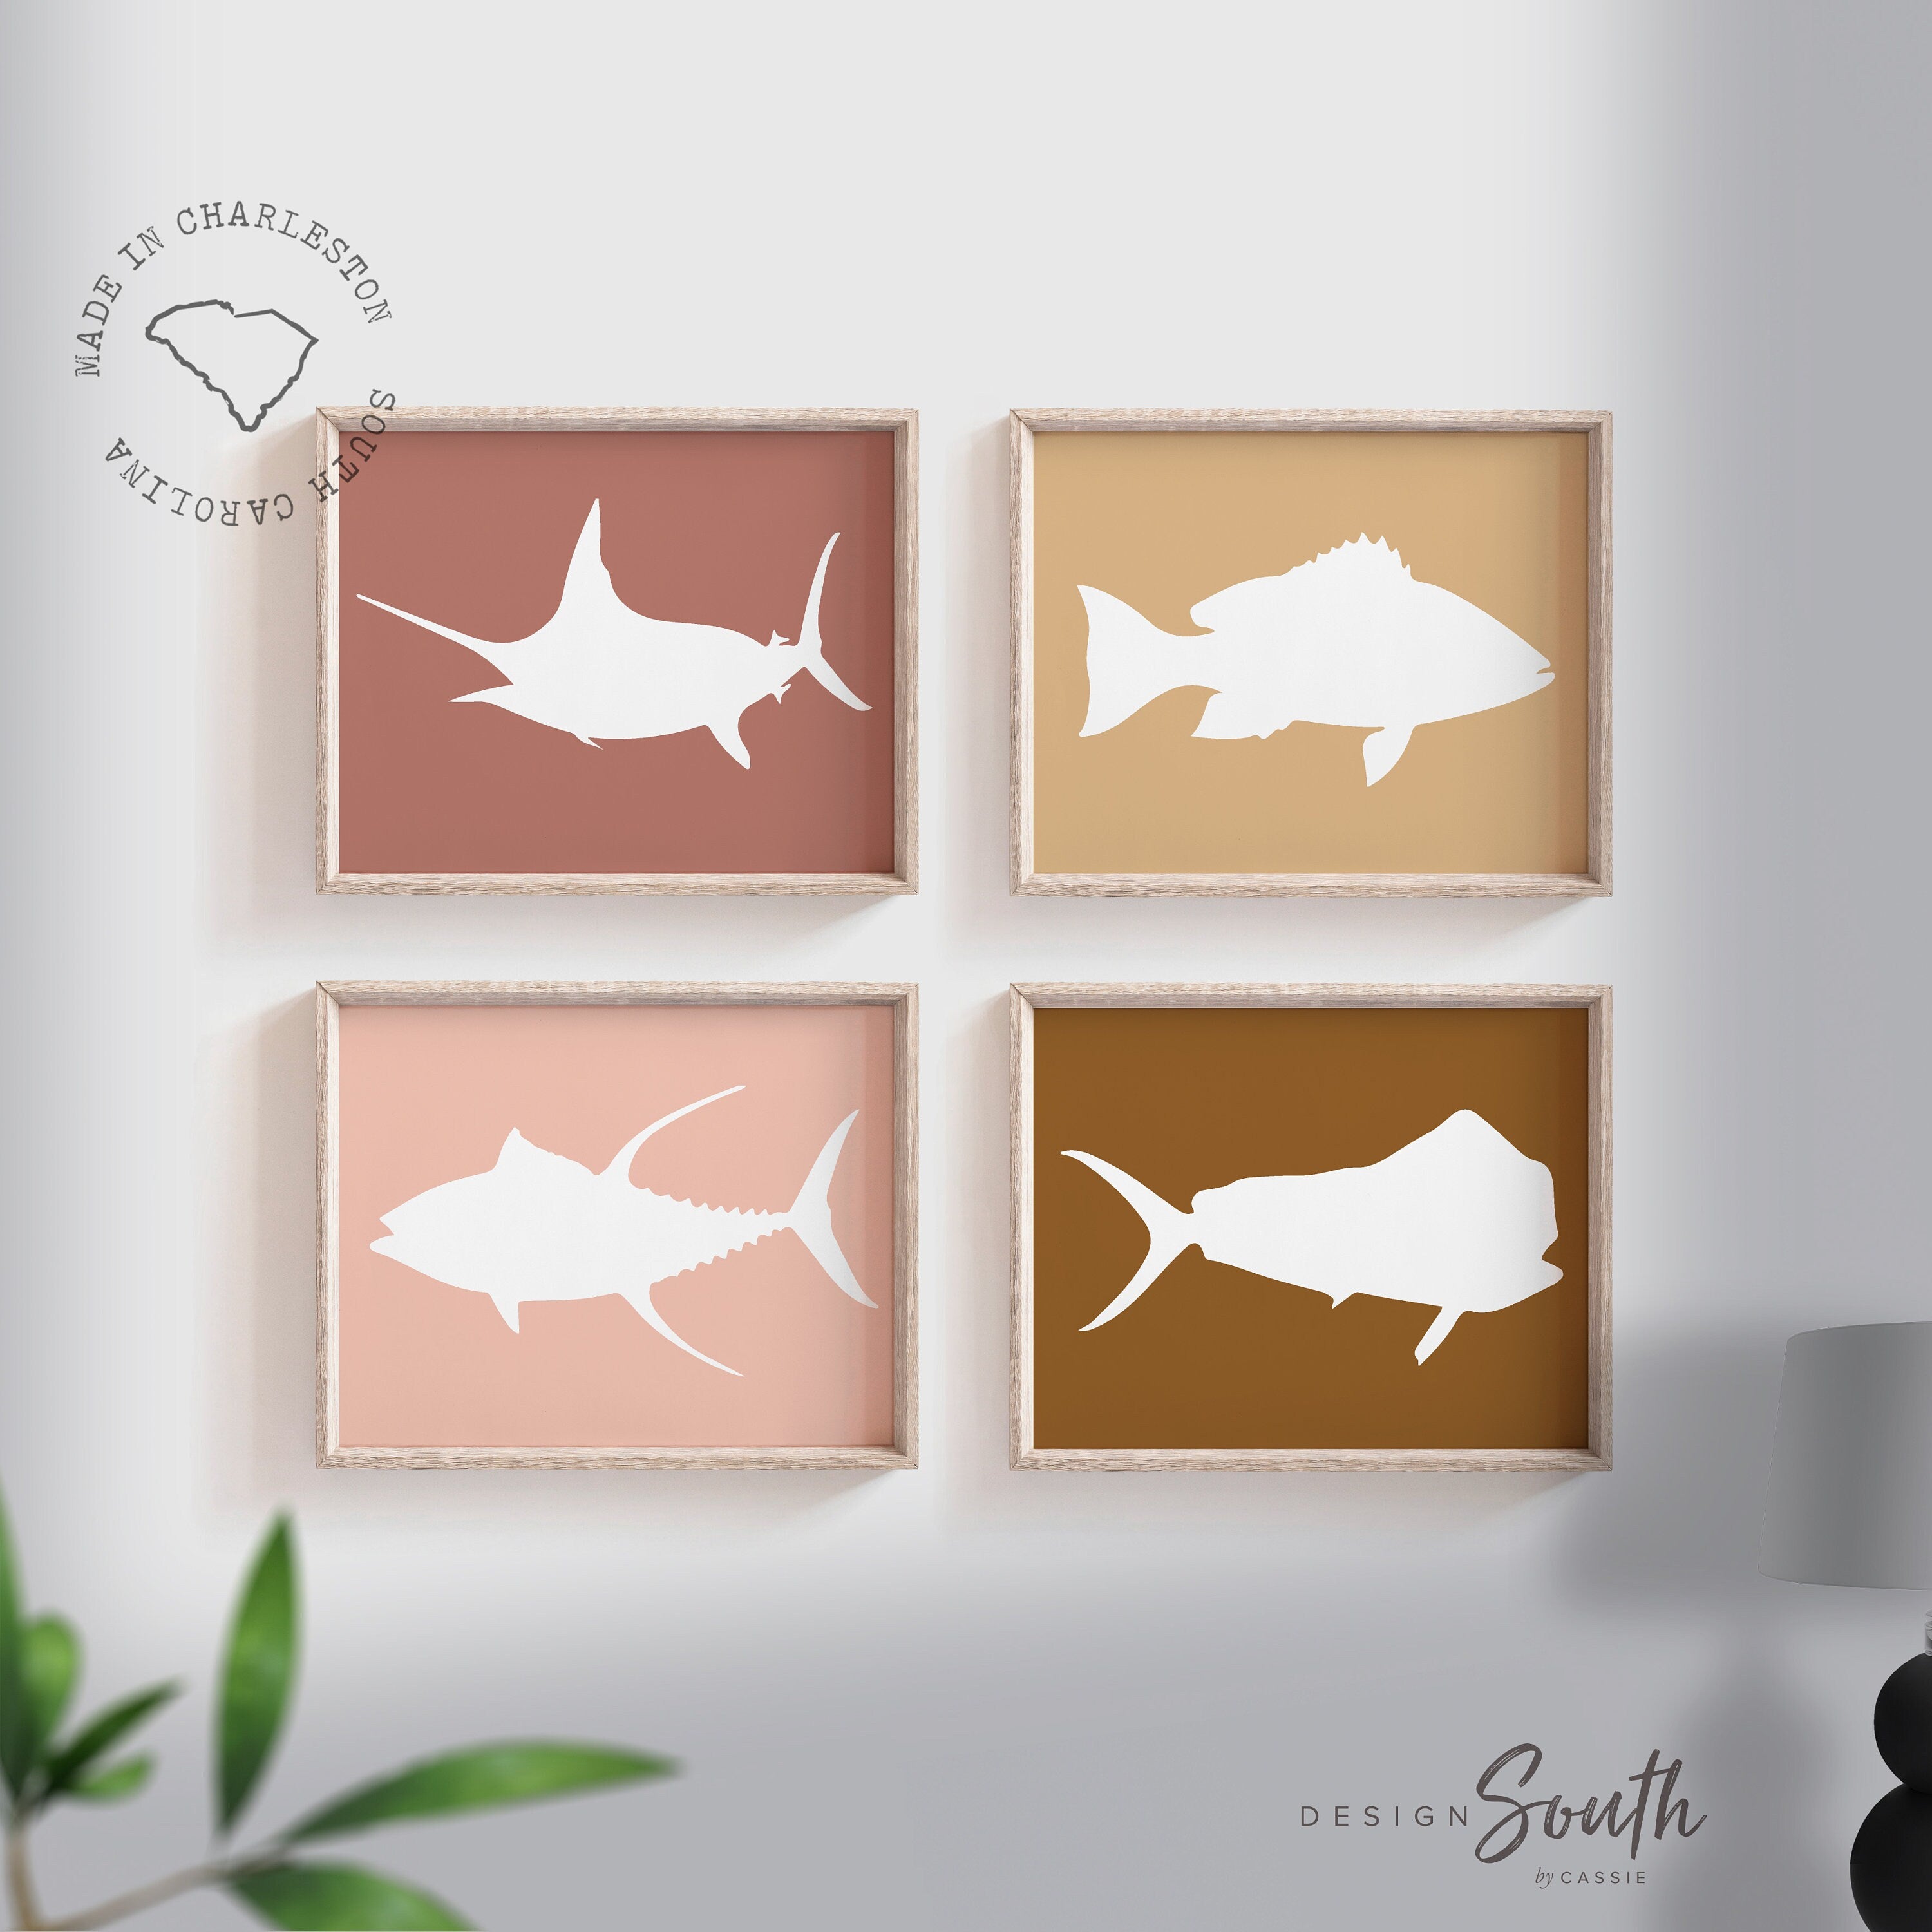 Offshore fishing, offshore fish, boys saltwater fish wall art